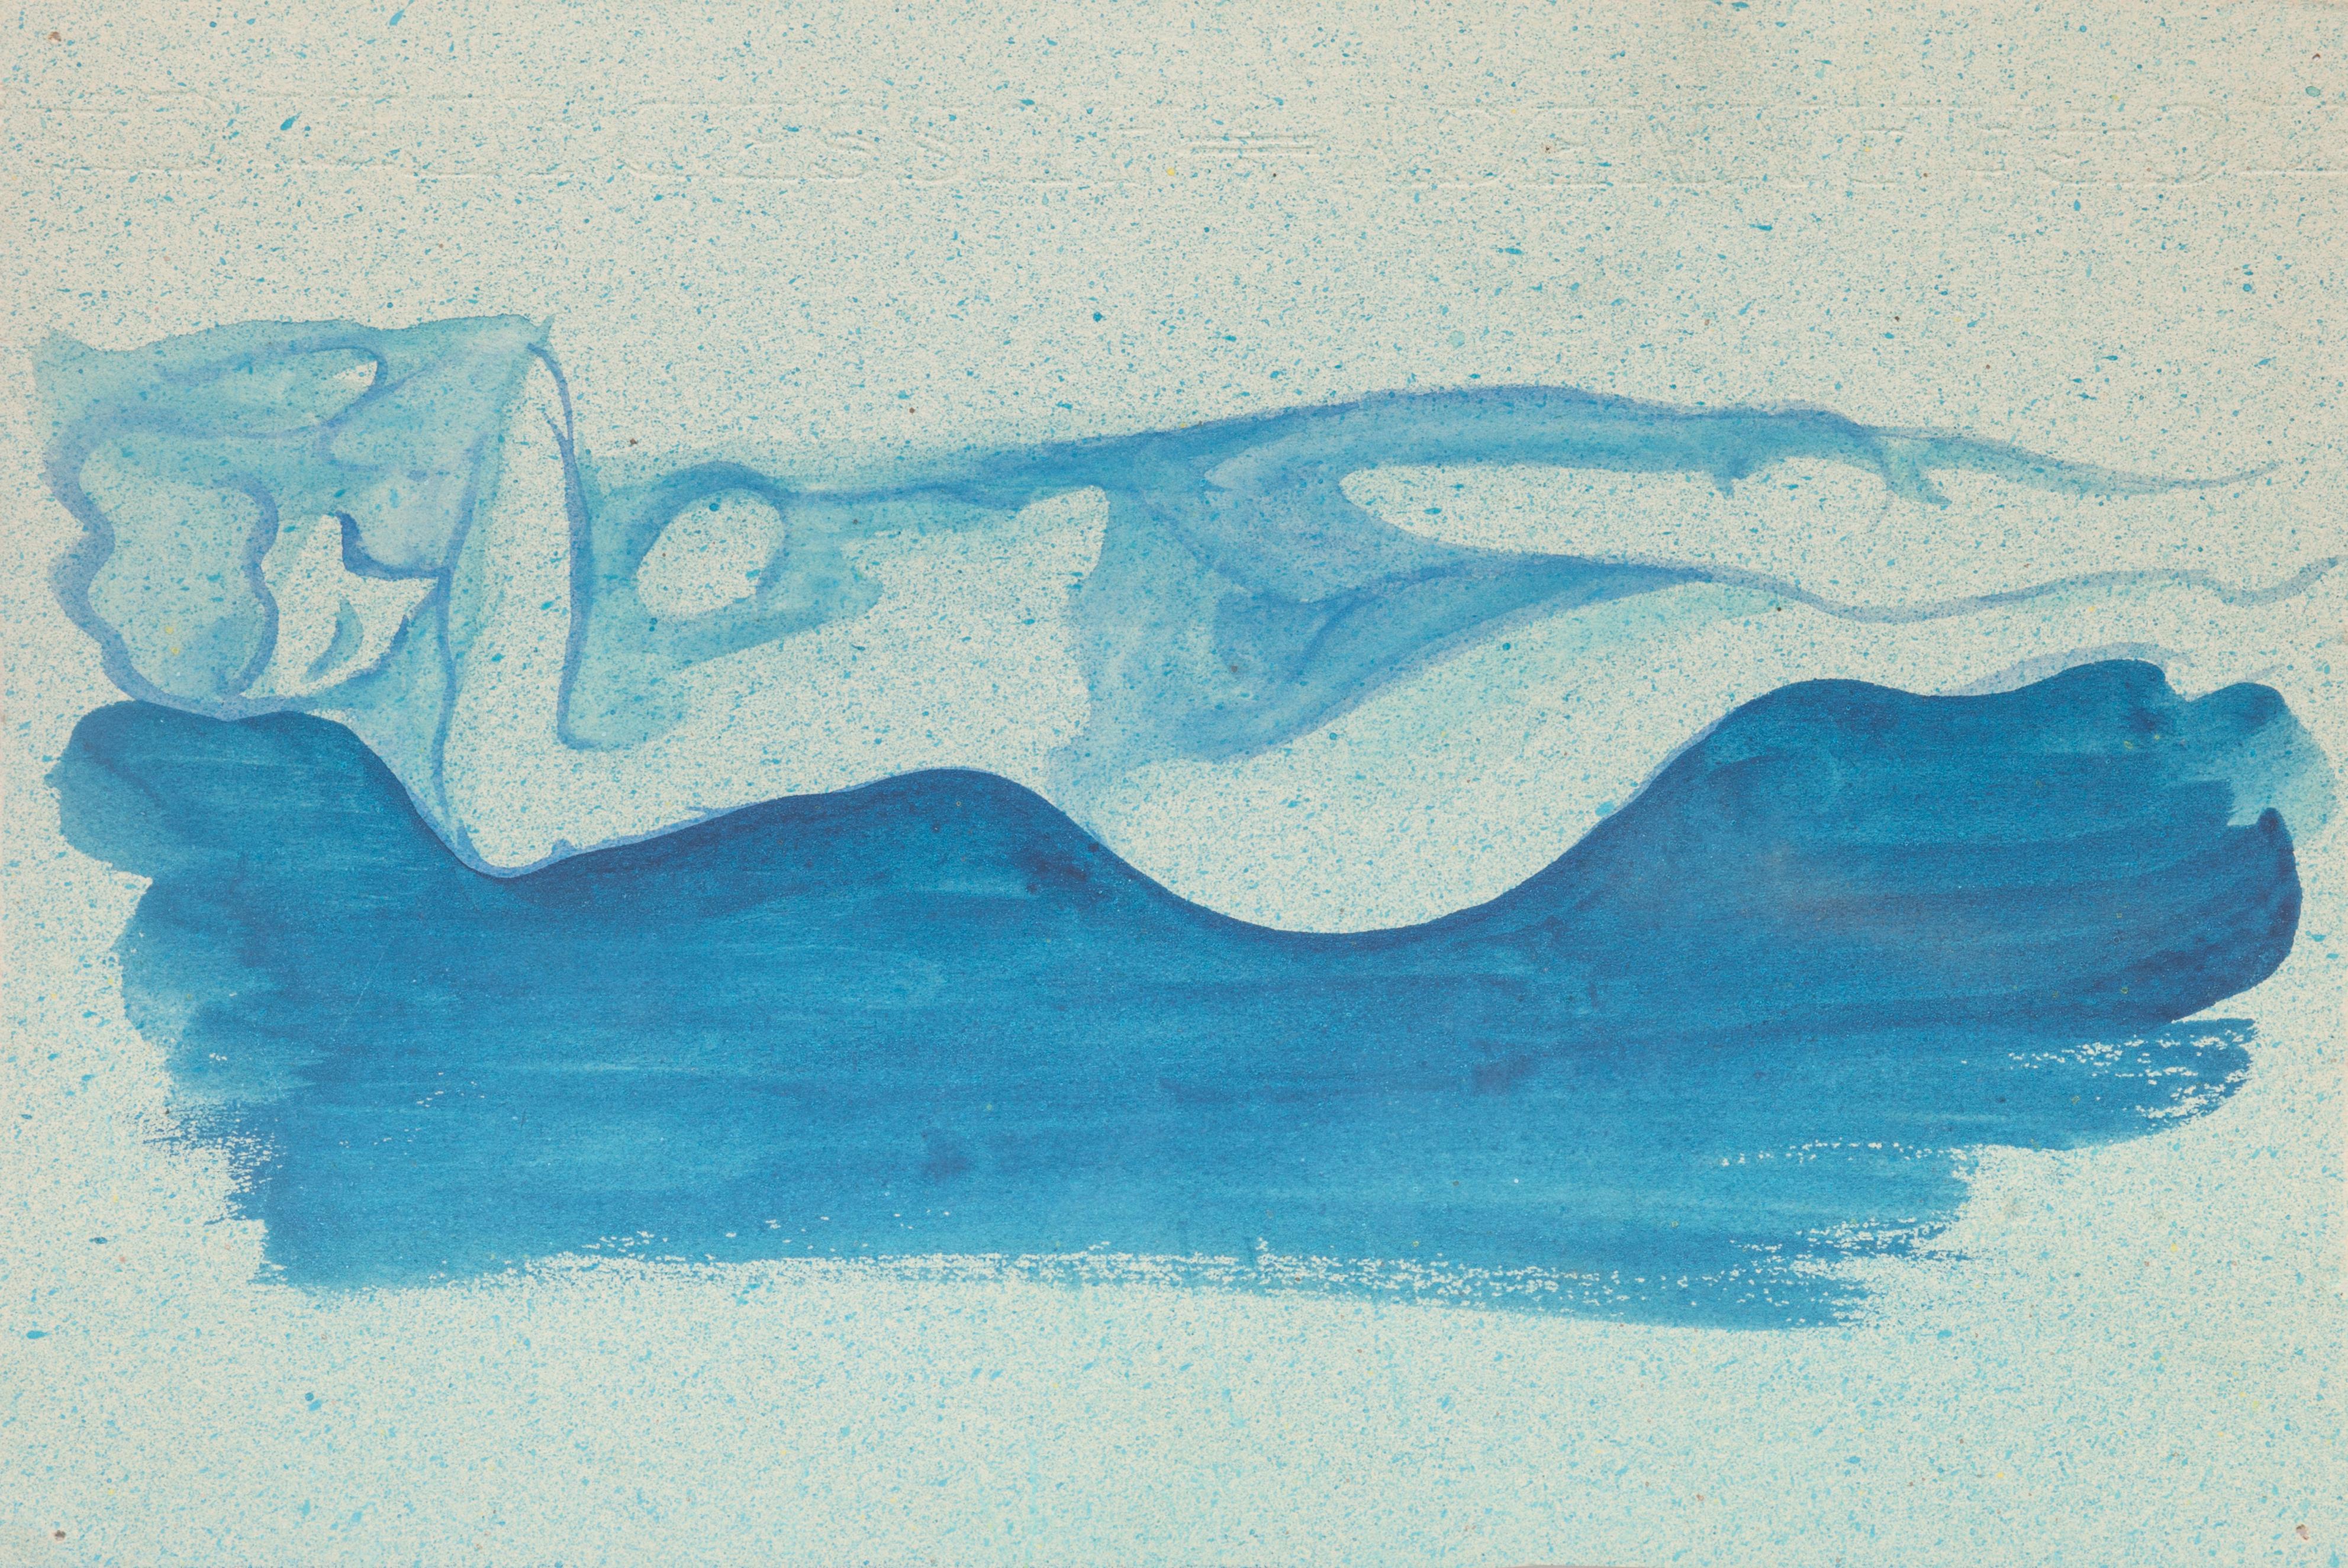 Blue Nude is an original drawing in turquoise tempera and watercolor a on paper, realized by Jean Delpech (1988-1916). 

Sheet dimension: 17 x 25 cm.

The artwork represents a nude woman lying down, skillfully created, through delicate lines and